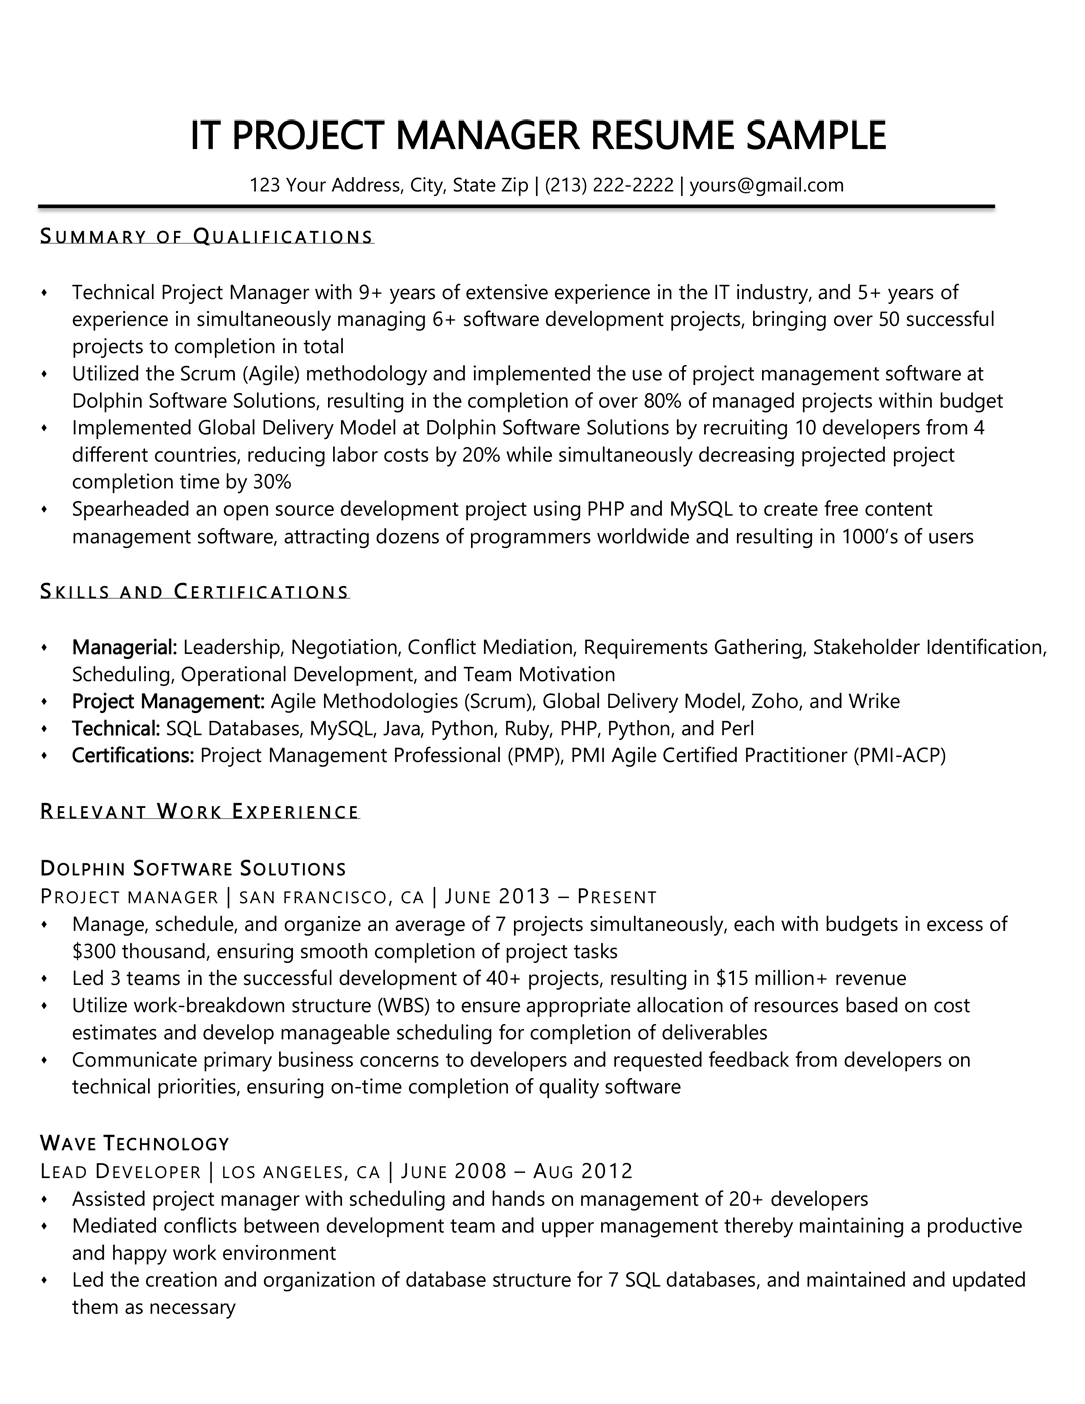 Learn Exactly How I Improved resume In 2 Days